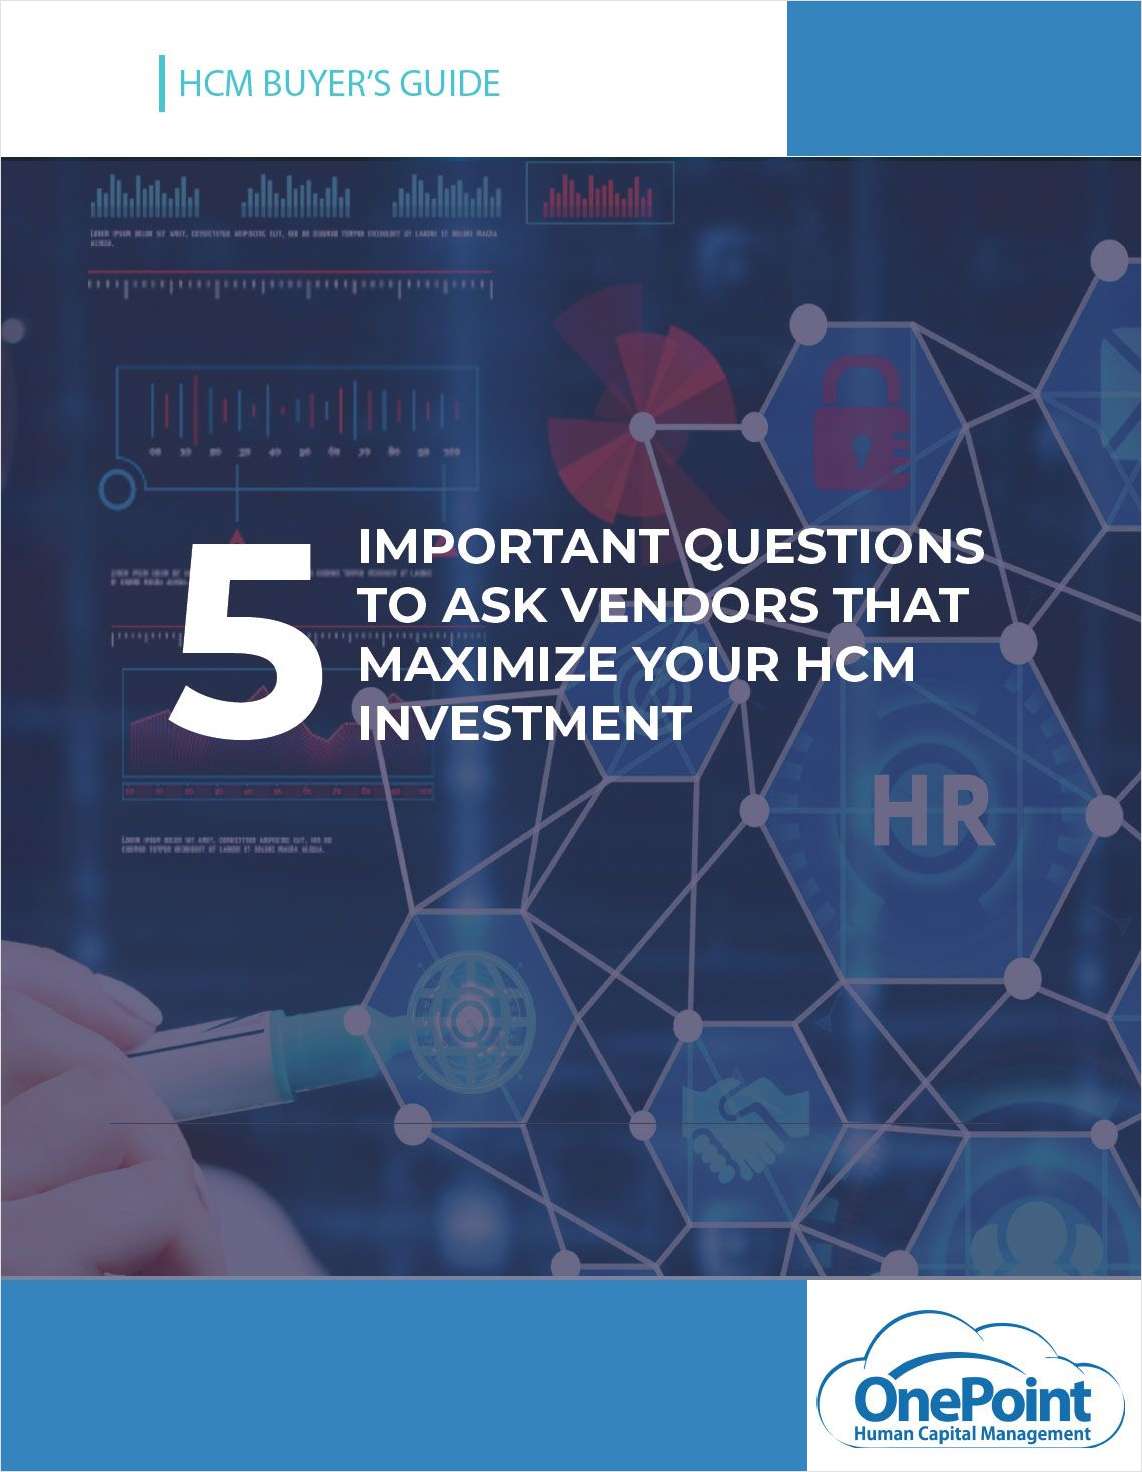 The 5 Most Important Questions To Ask Vendors When Vetting New HCM Partners